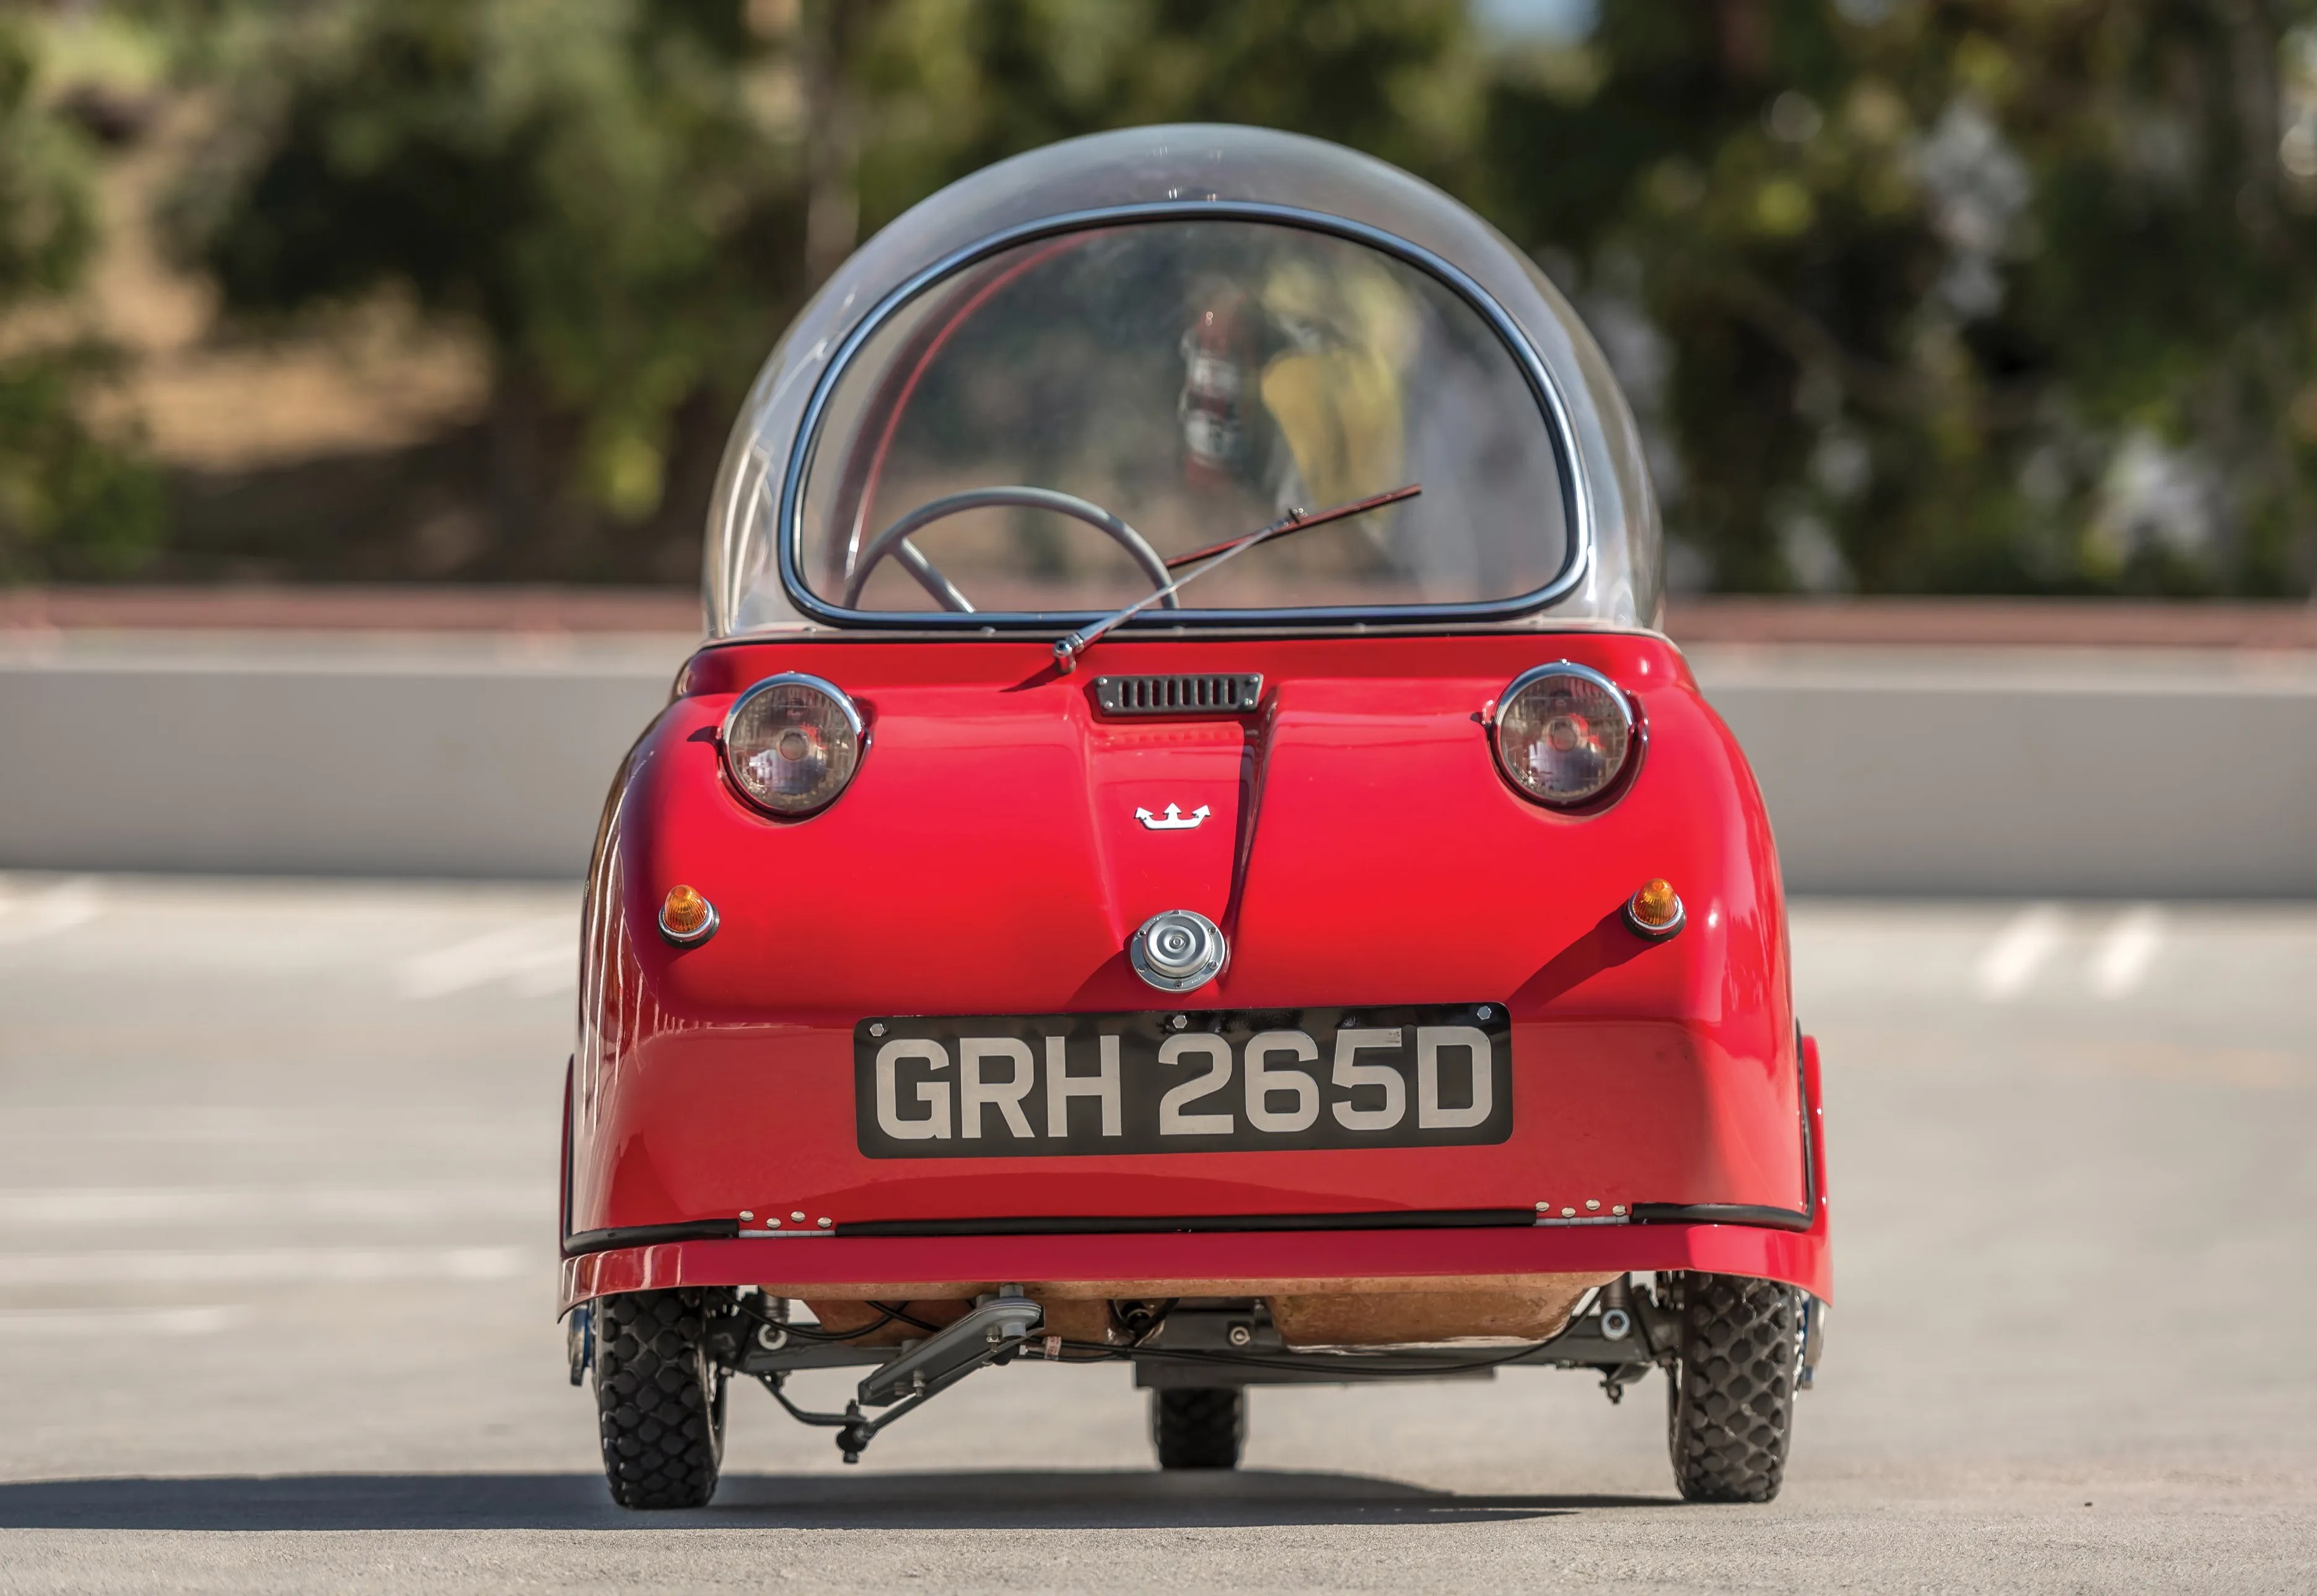 This is the world's smallest car built for two people to sit together 'occasionally'